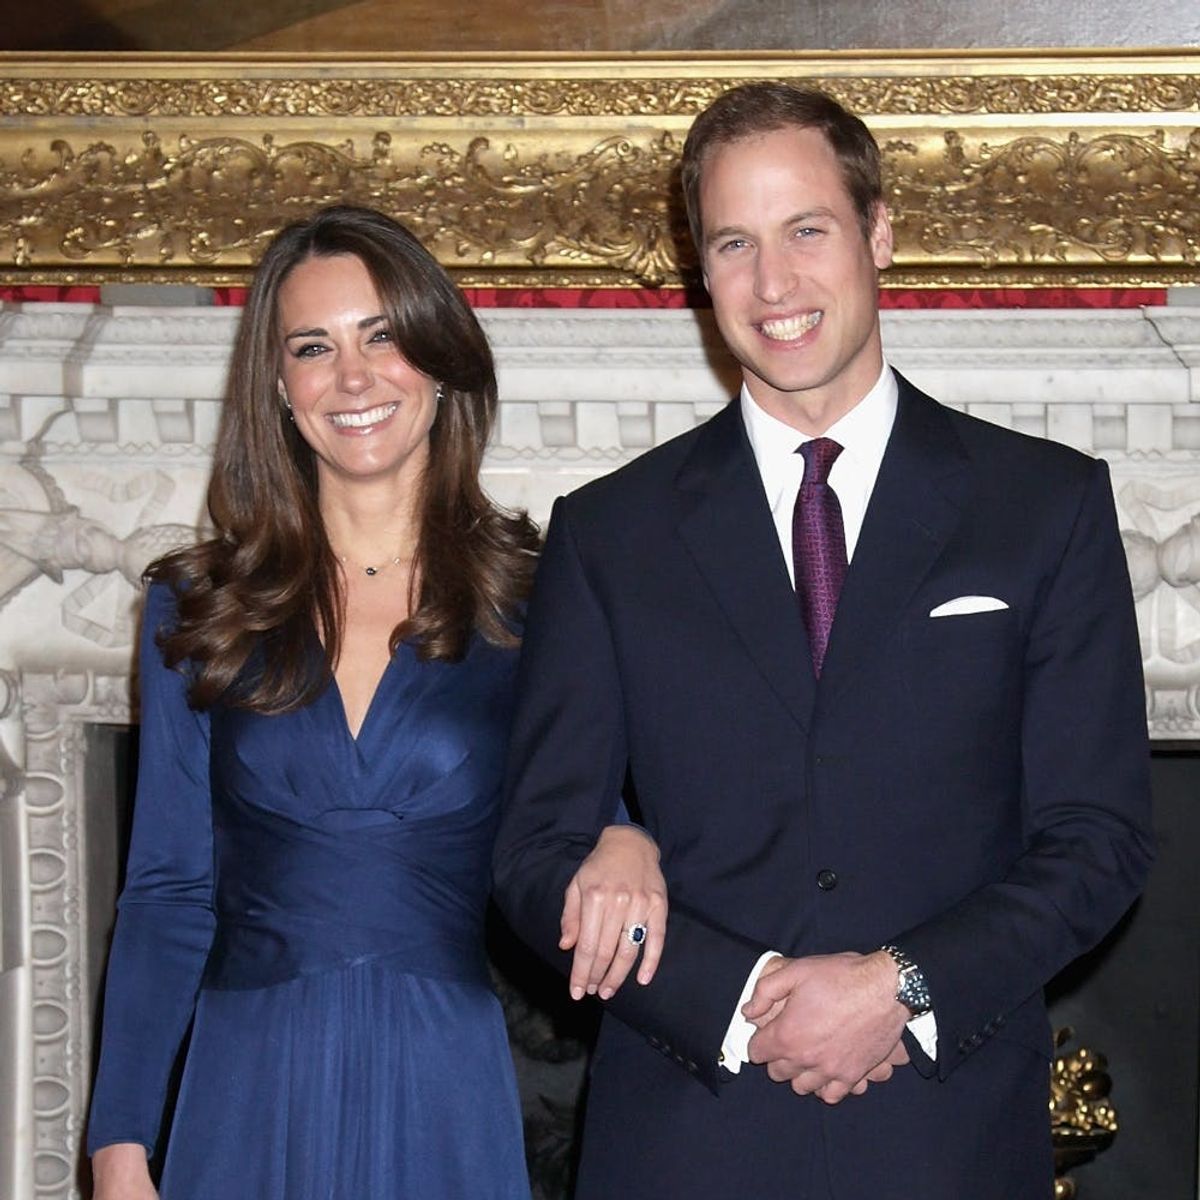 Prince William Just Revealed a Surprising Detail About His Proposal to Kate Middleton